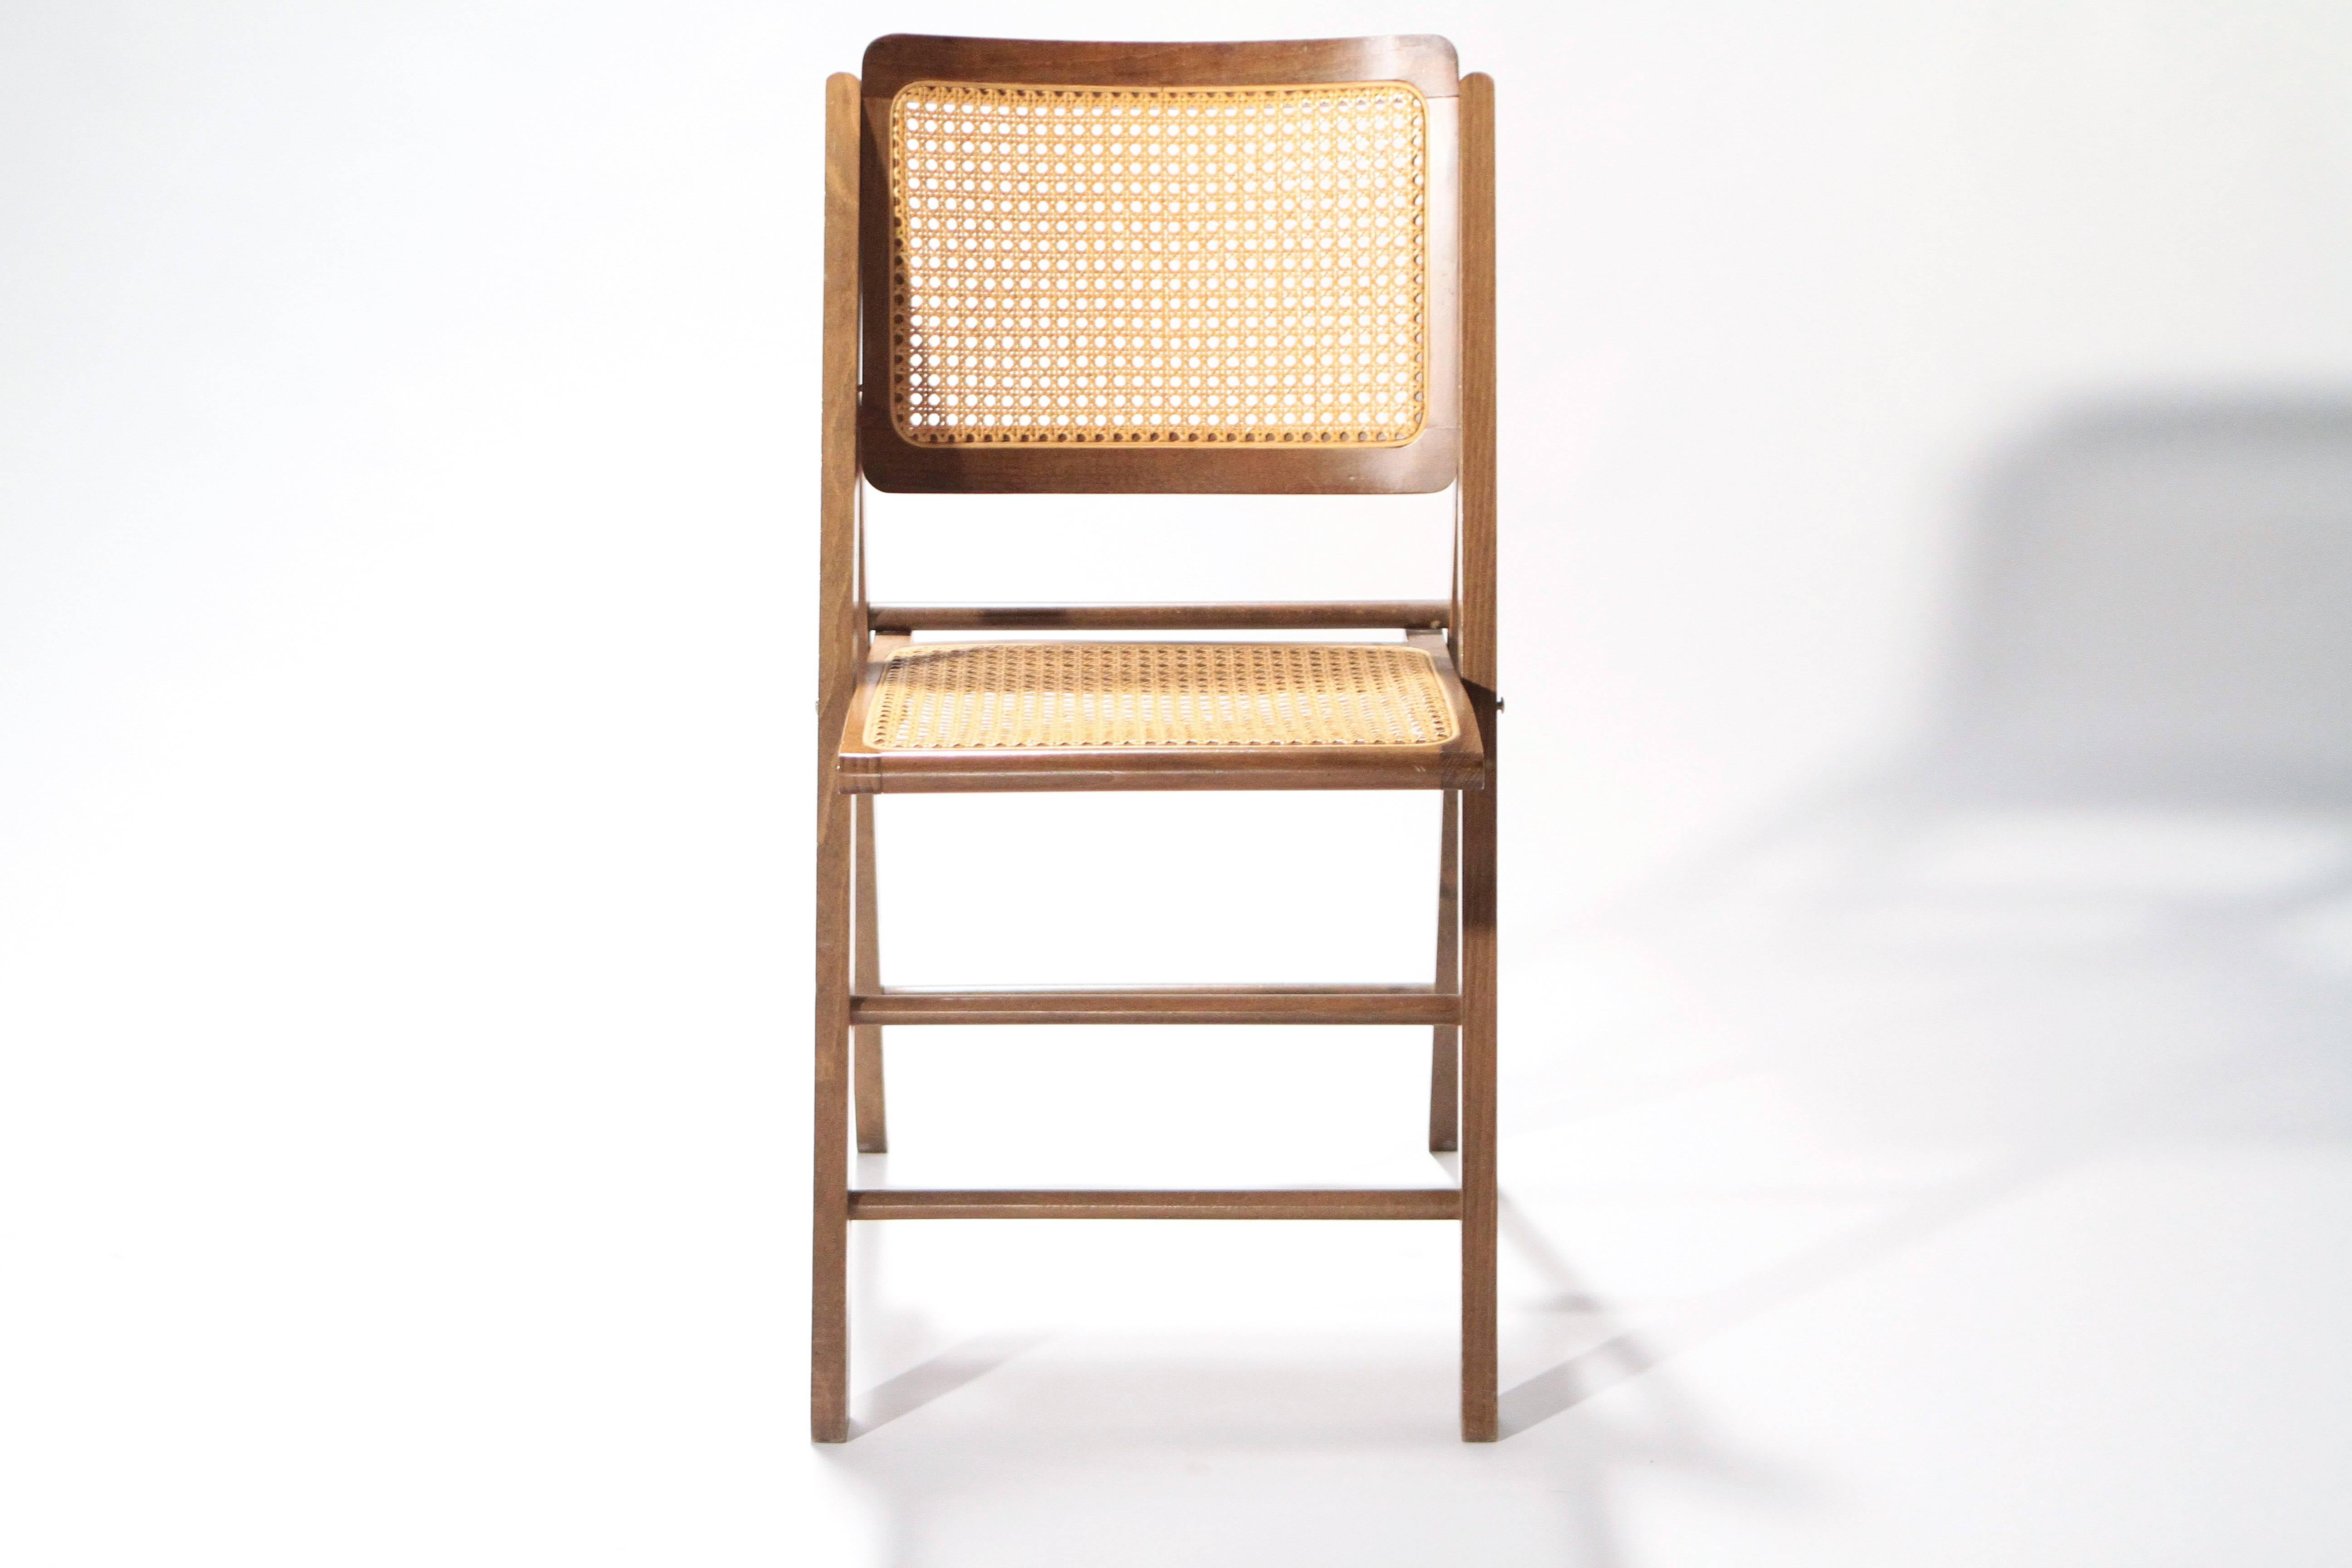 The simplicity of French modernism is evident in this set of caned folding chairs from the 1950s. Constructed with warm teak wood, the chairs were designed in a creative, Minimalist style inspired by the work of Pierre Jeanneret and Gérard